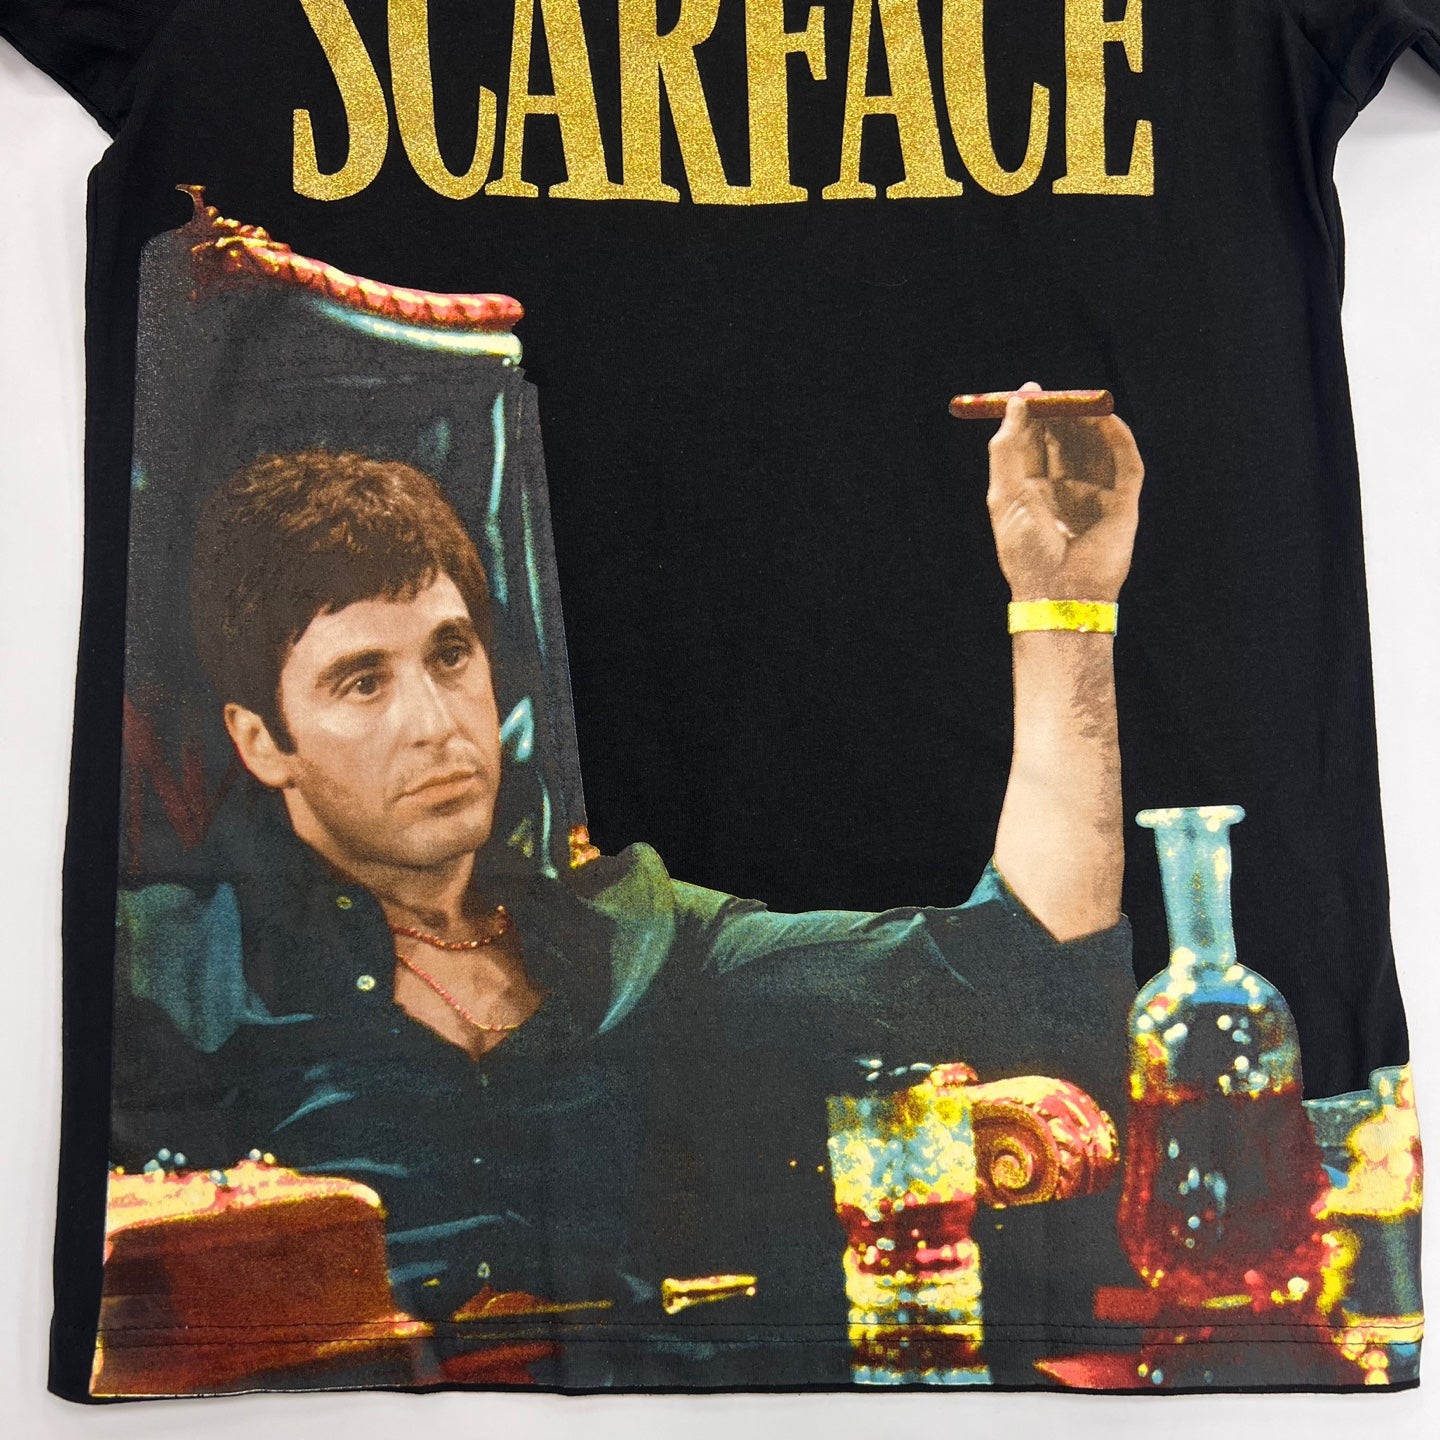 SCARFACE Glittering Lettering Graphic T-Shirt